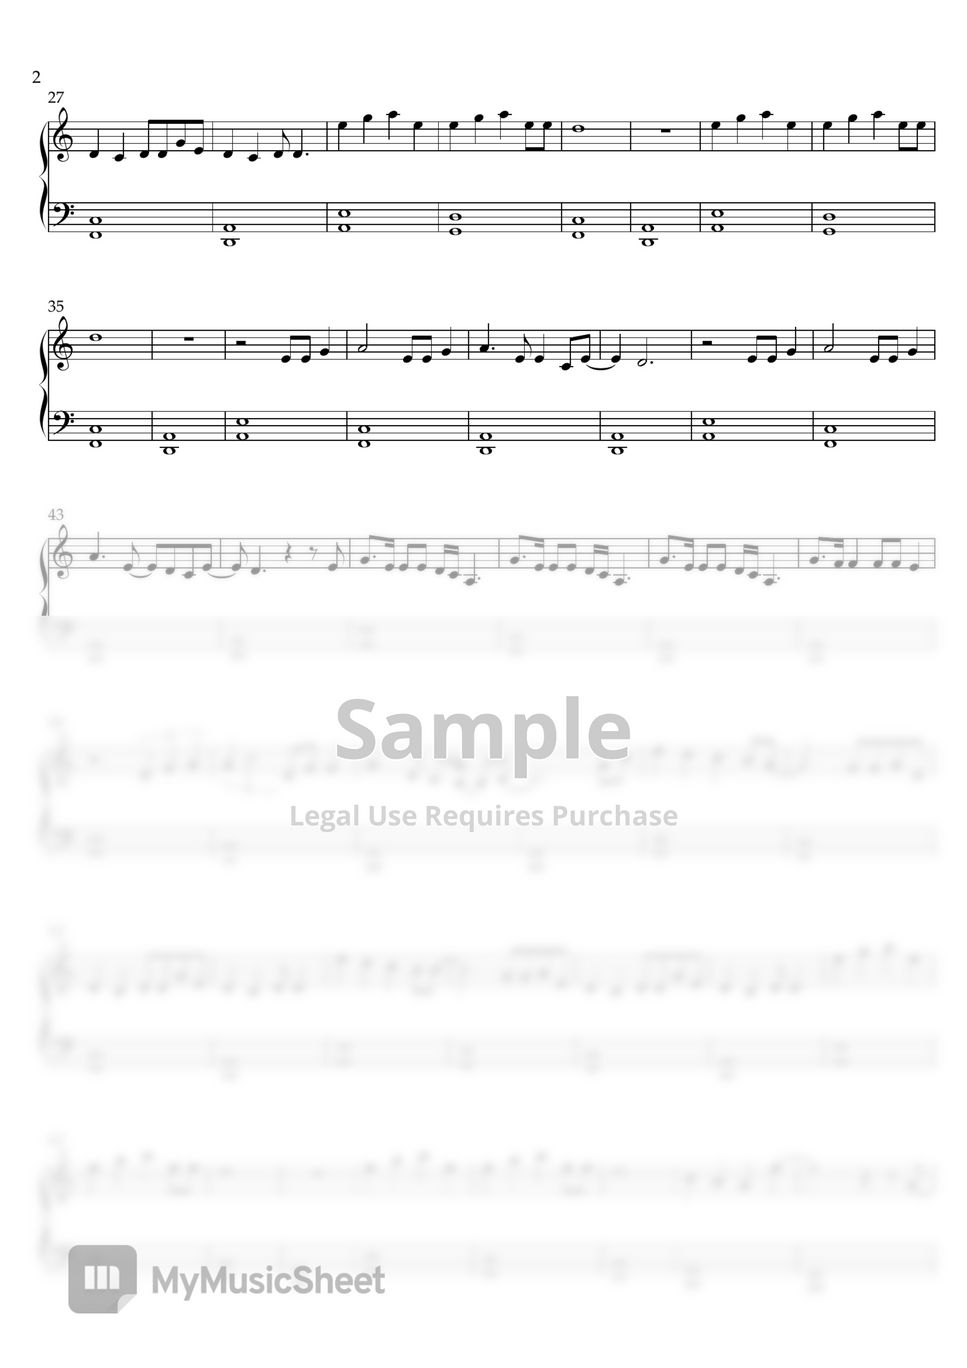 Reflections – The Neighbourhood GUITAR MELODY TAB Sheet music for